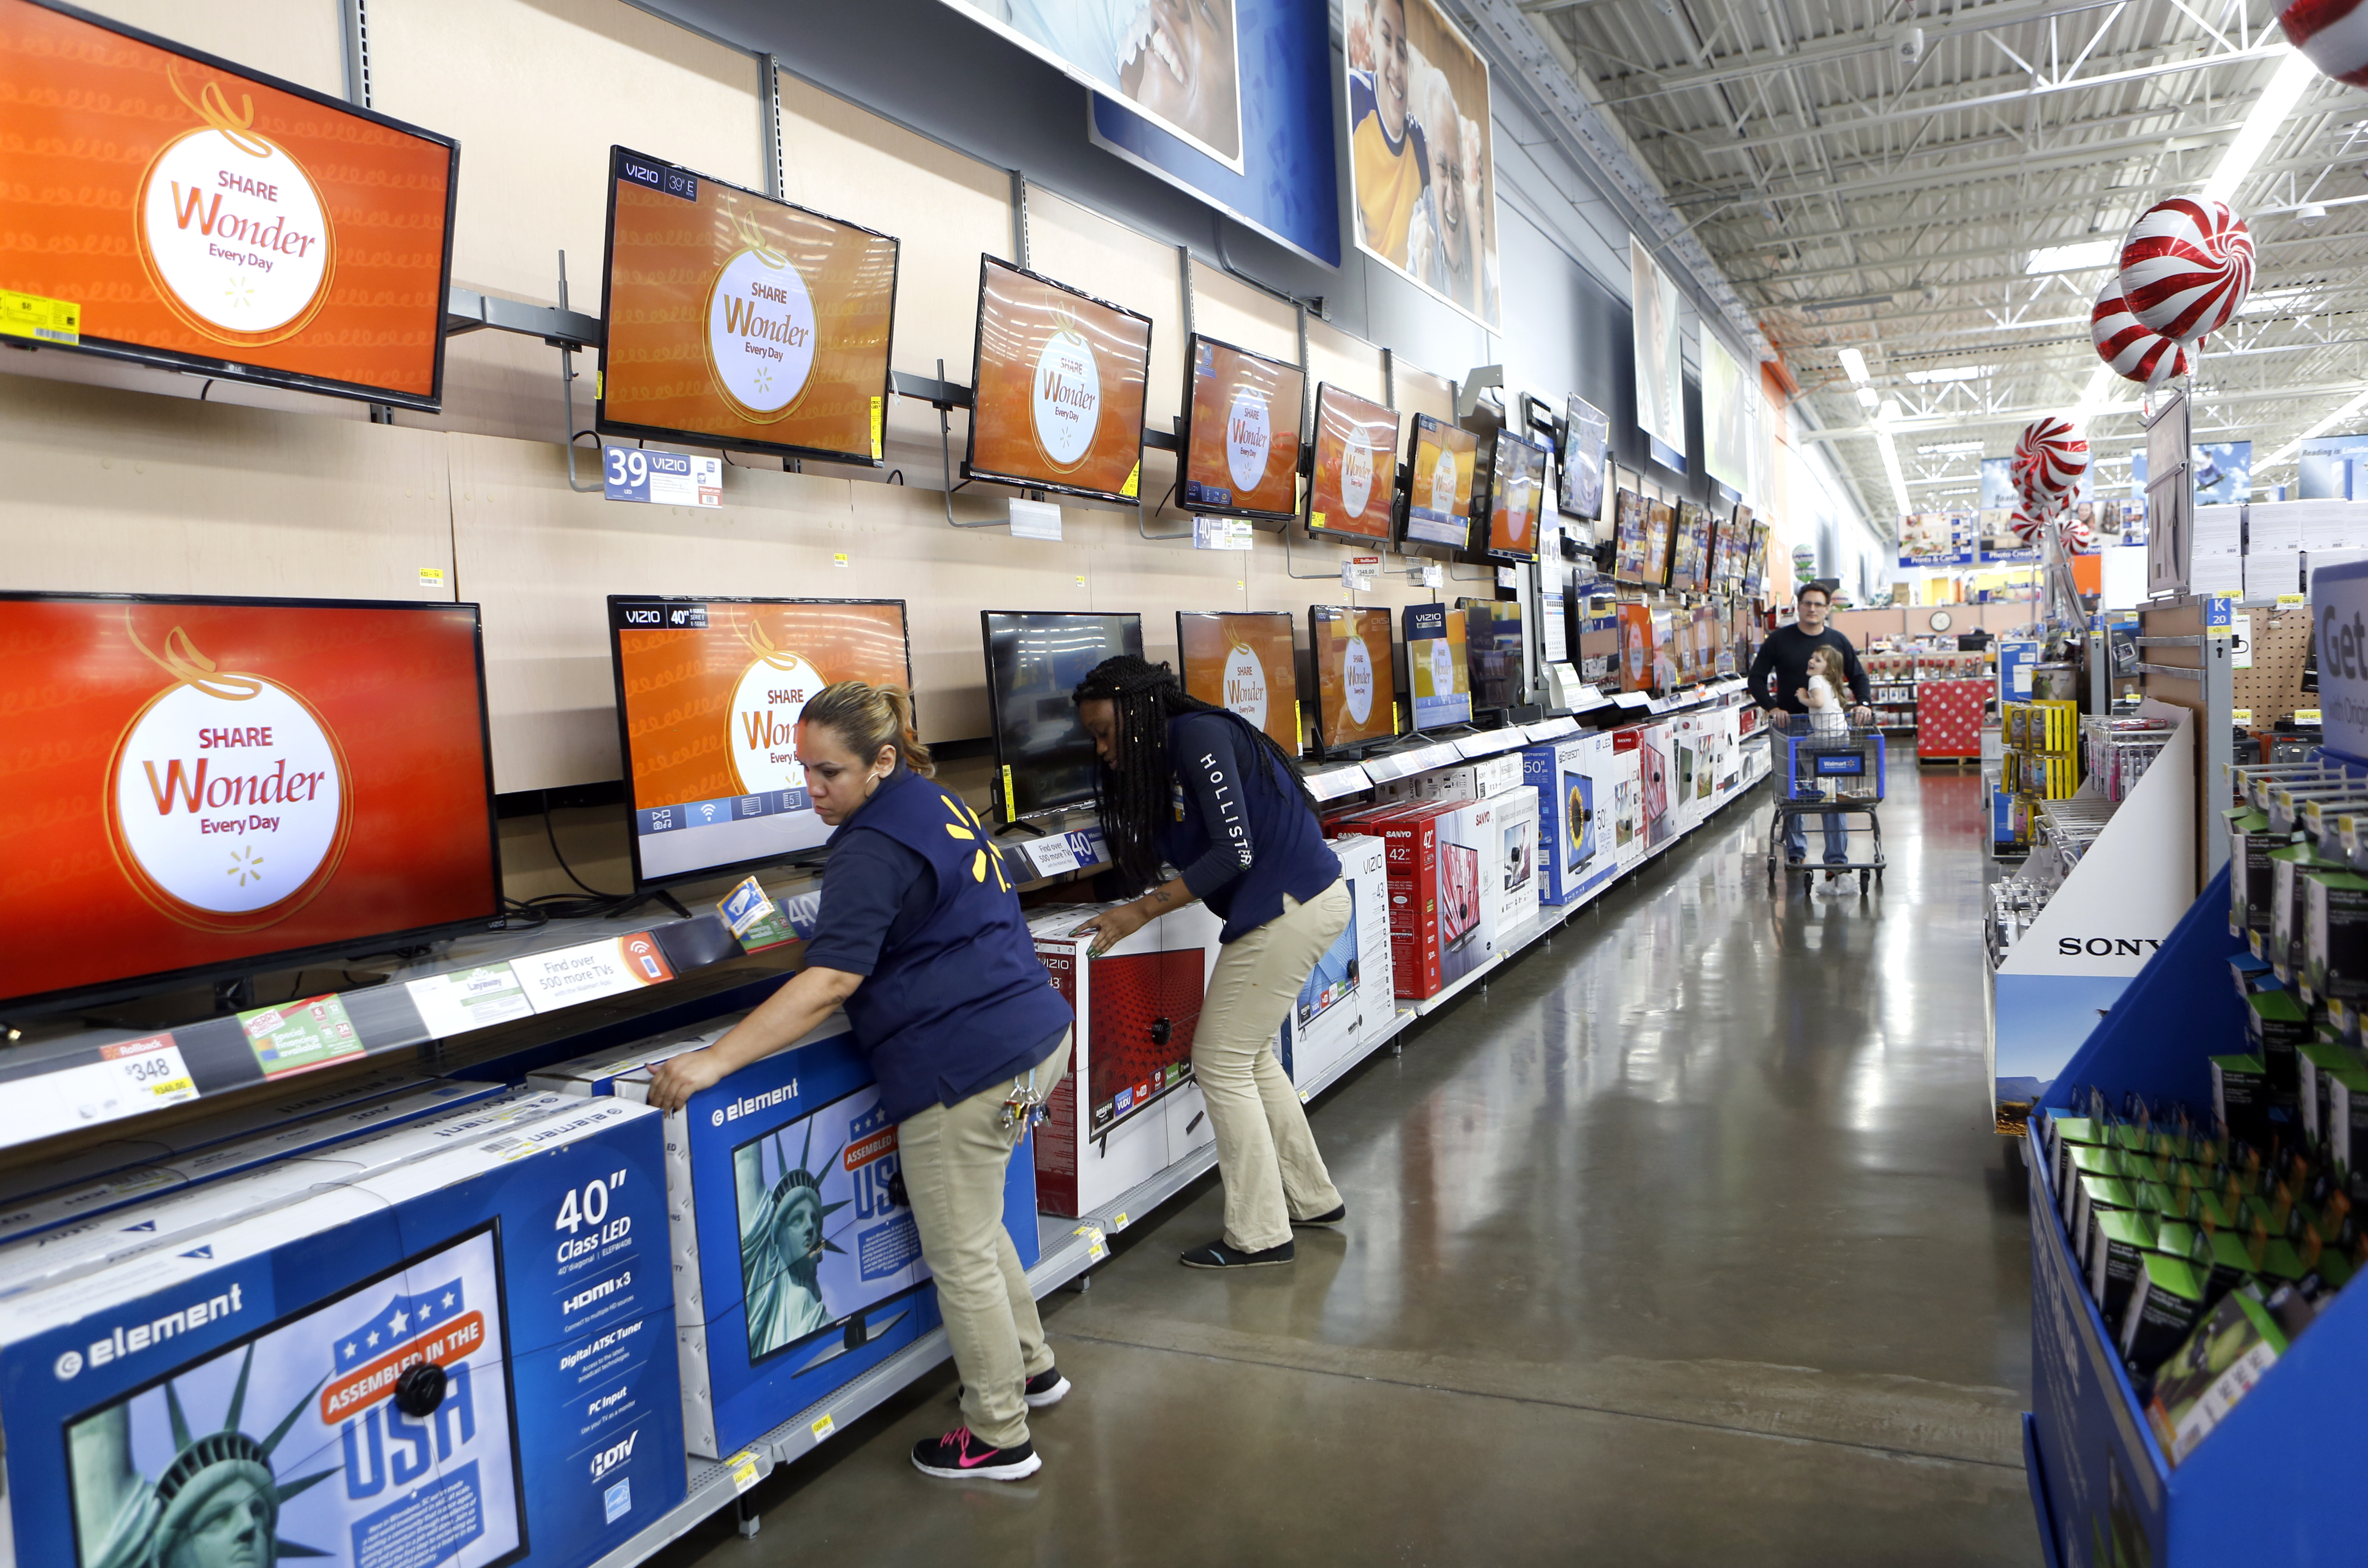 Employees Leslie Luna (left) and Kenya Phelps (right) straighten the TV display at Walmart in Dallas. Photographed on Monday, November 16, 2015. Photo/Lara Solt